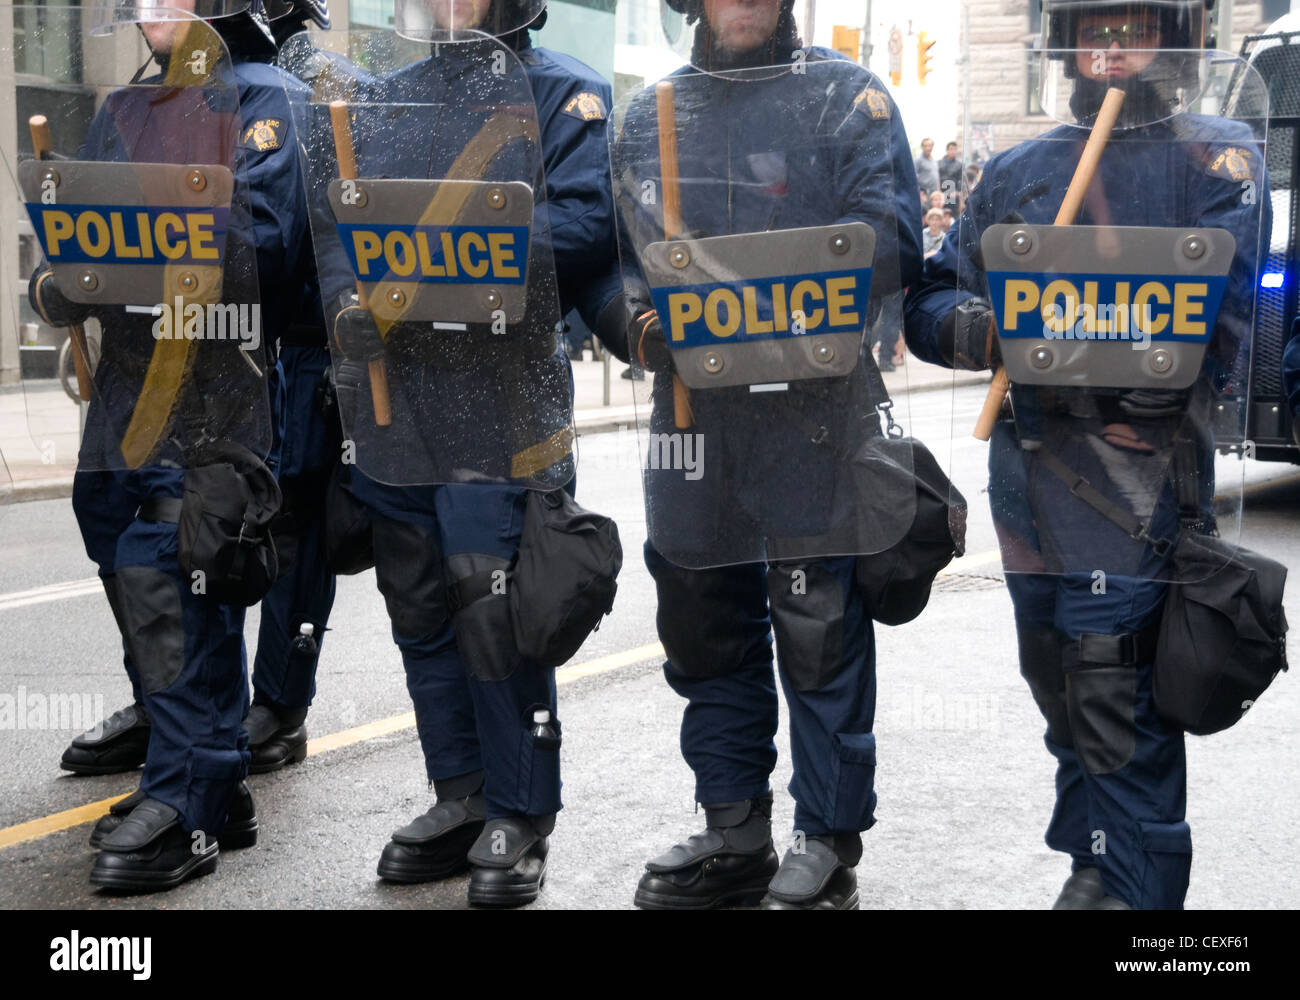 RCMP Riot police facing protesters with shields and batons on a downtown street during the G20 economic summit in 2010, Toronto, Ontario, Canada. Stock Photo